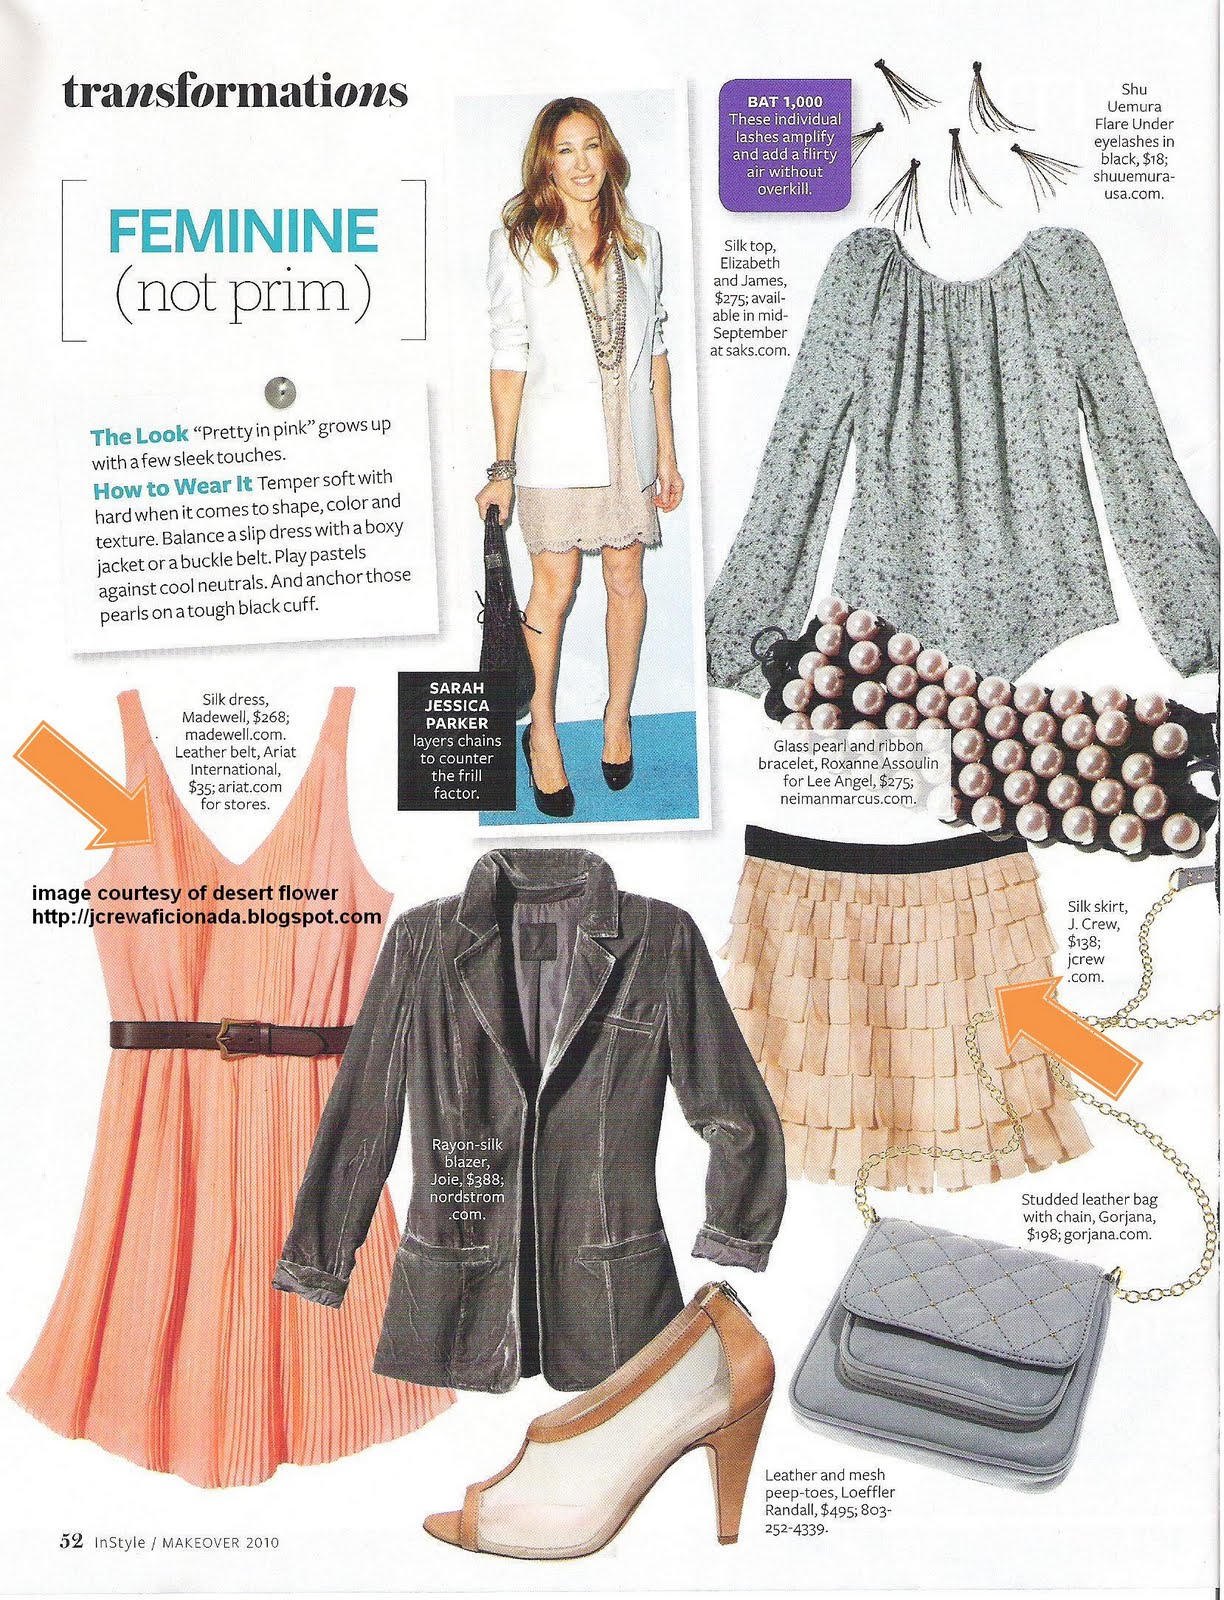 J.Crew Aficionada: J.Crew & Madewell Spotted in InStyle